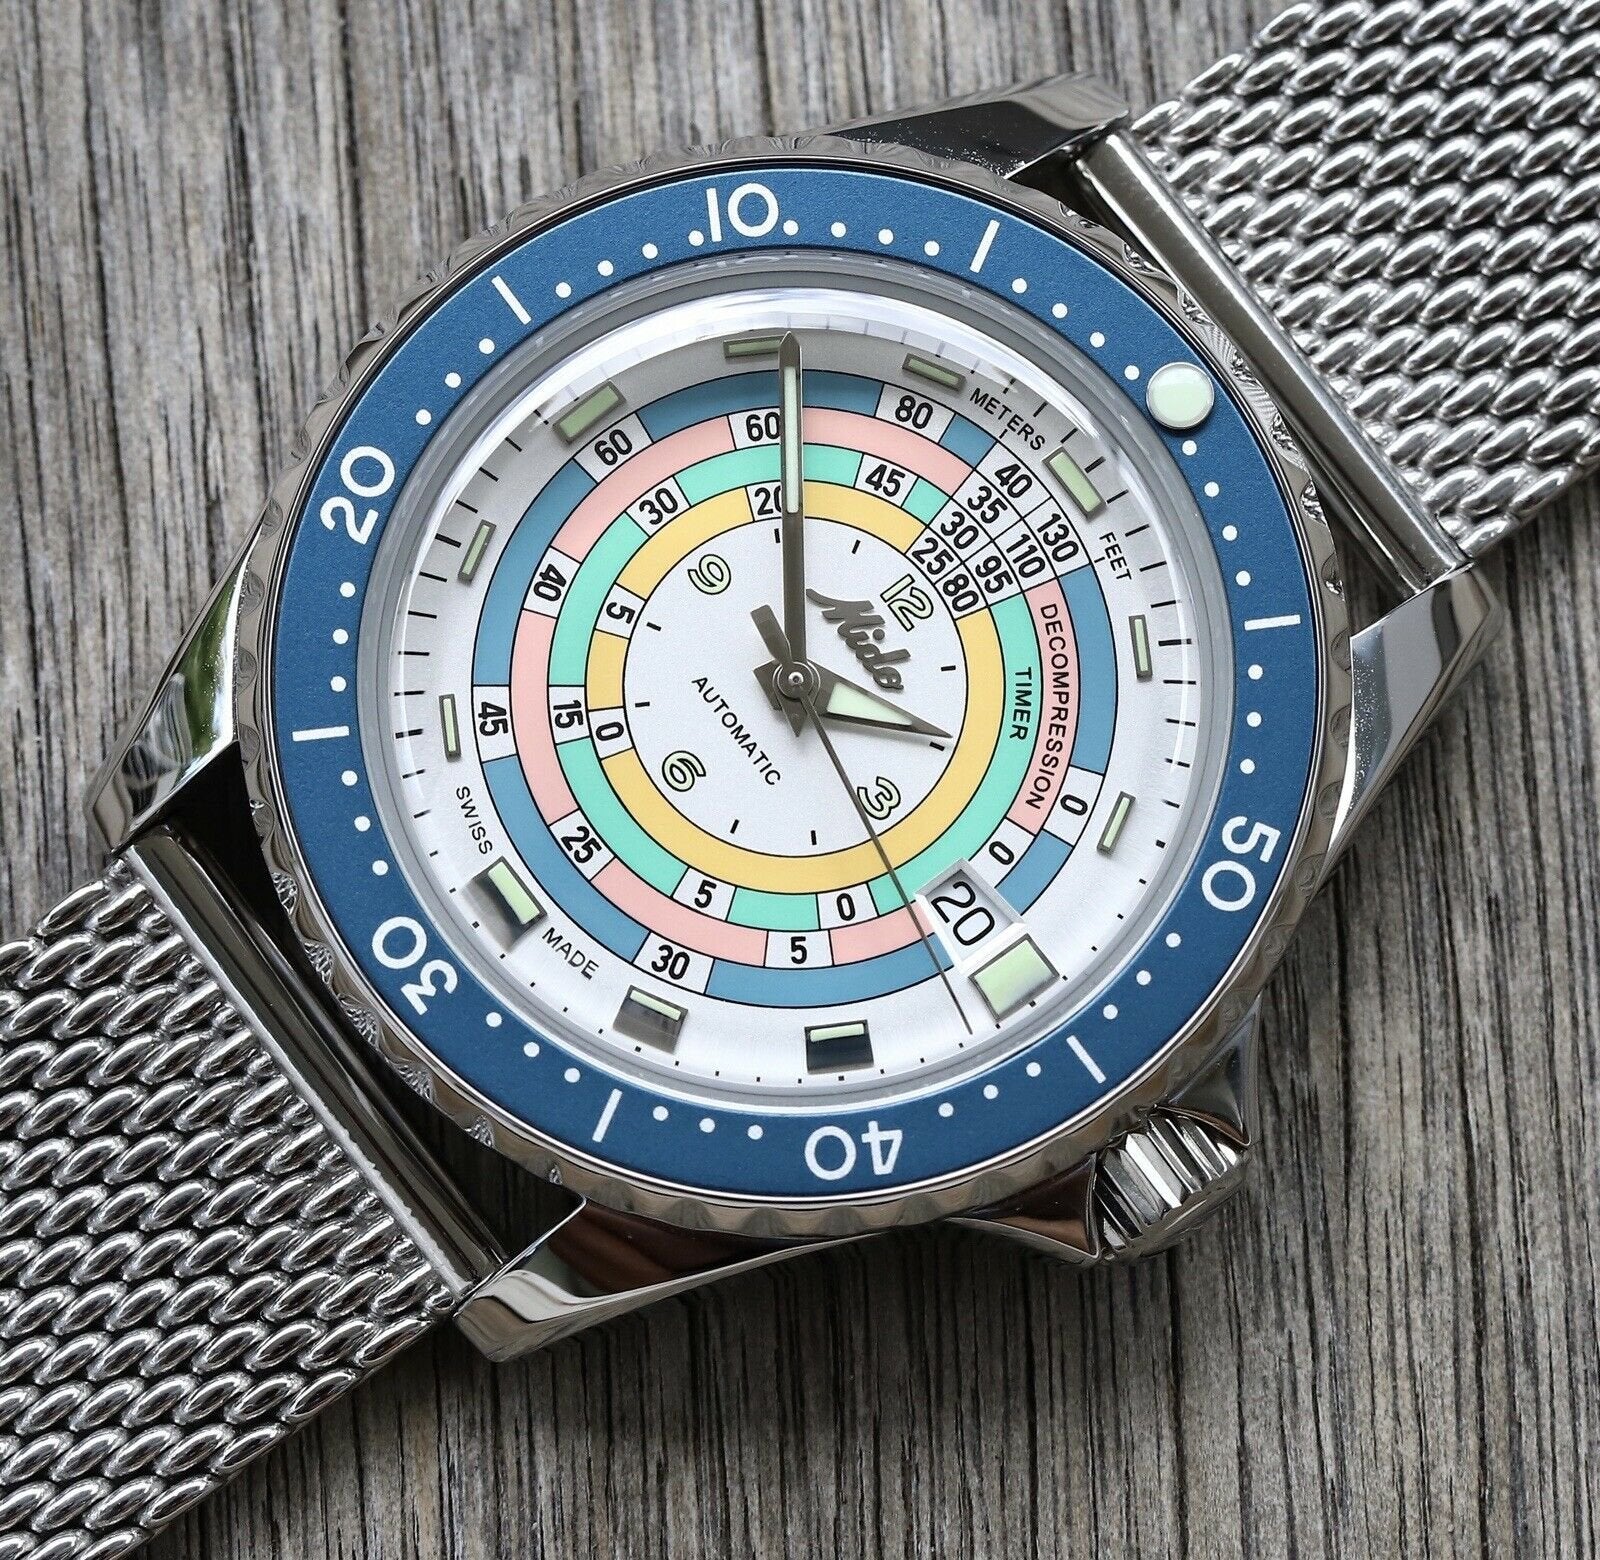 Mido_Ocean_Star_Decompression_Timer_1961_LE_Turquoise_M026.807.11.031.00_-_2021_Watch_Vault_02.jpg